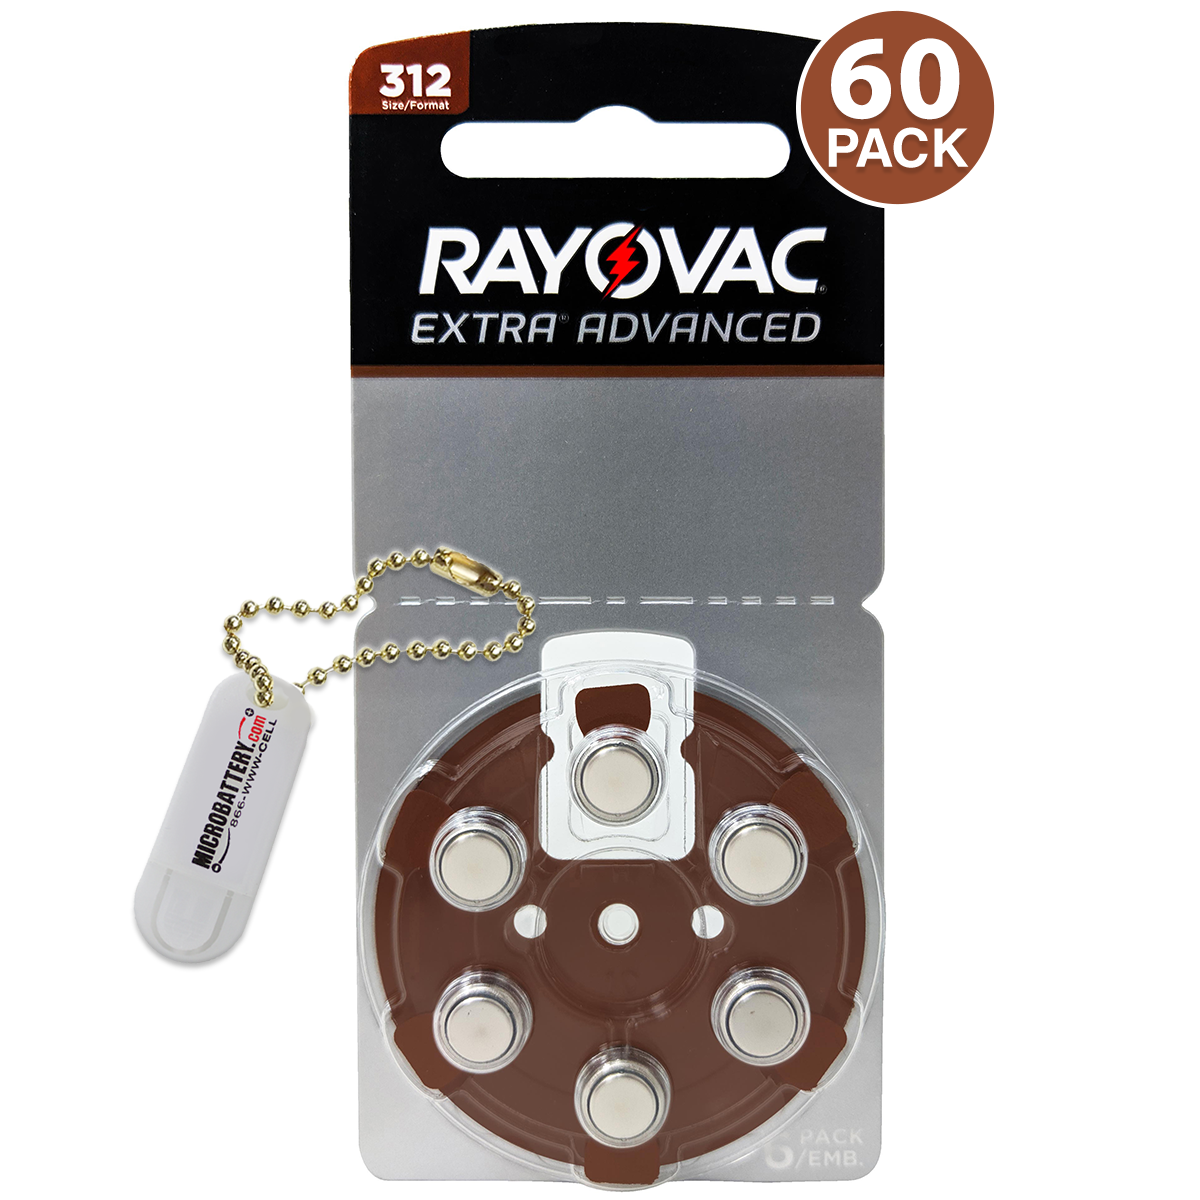 Rayovac Size 312 1.45v Hearing Aid Batteries + Hab Holder Keychain (60 Count)